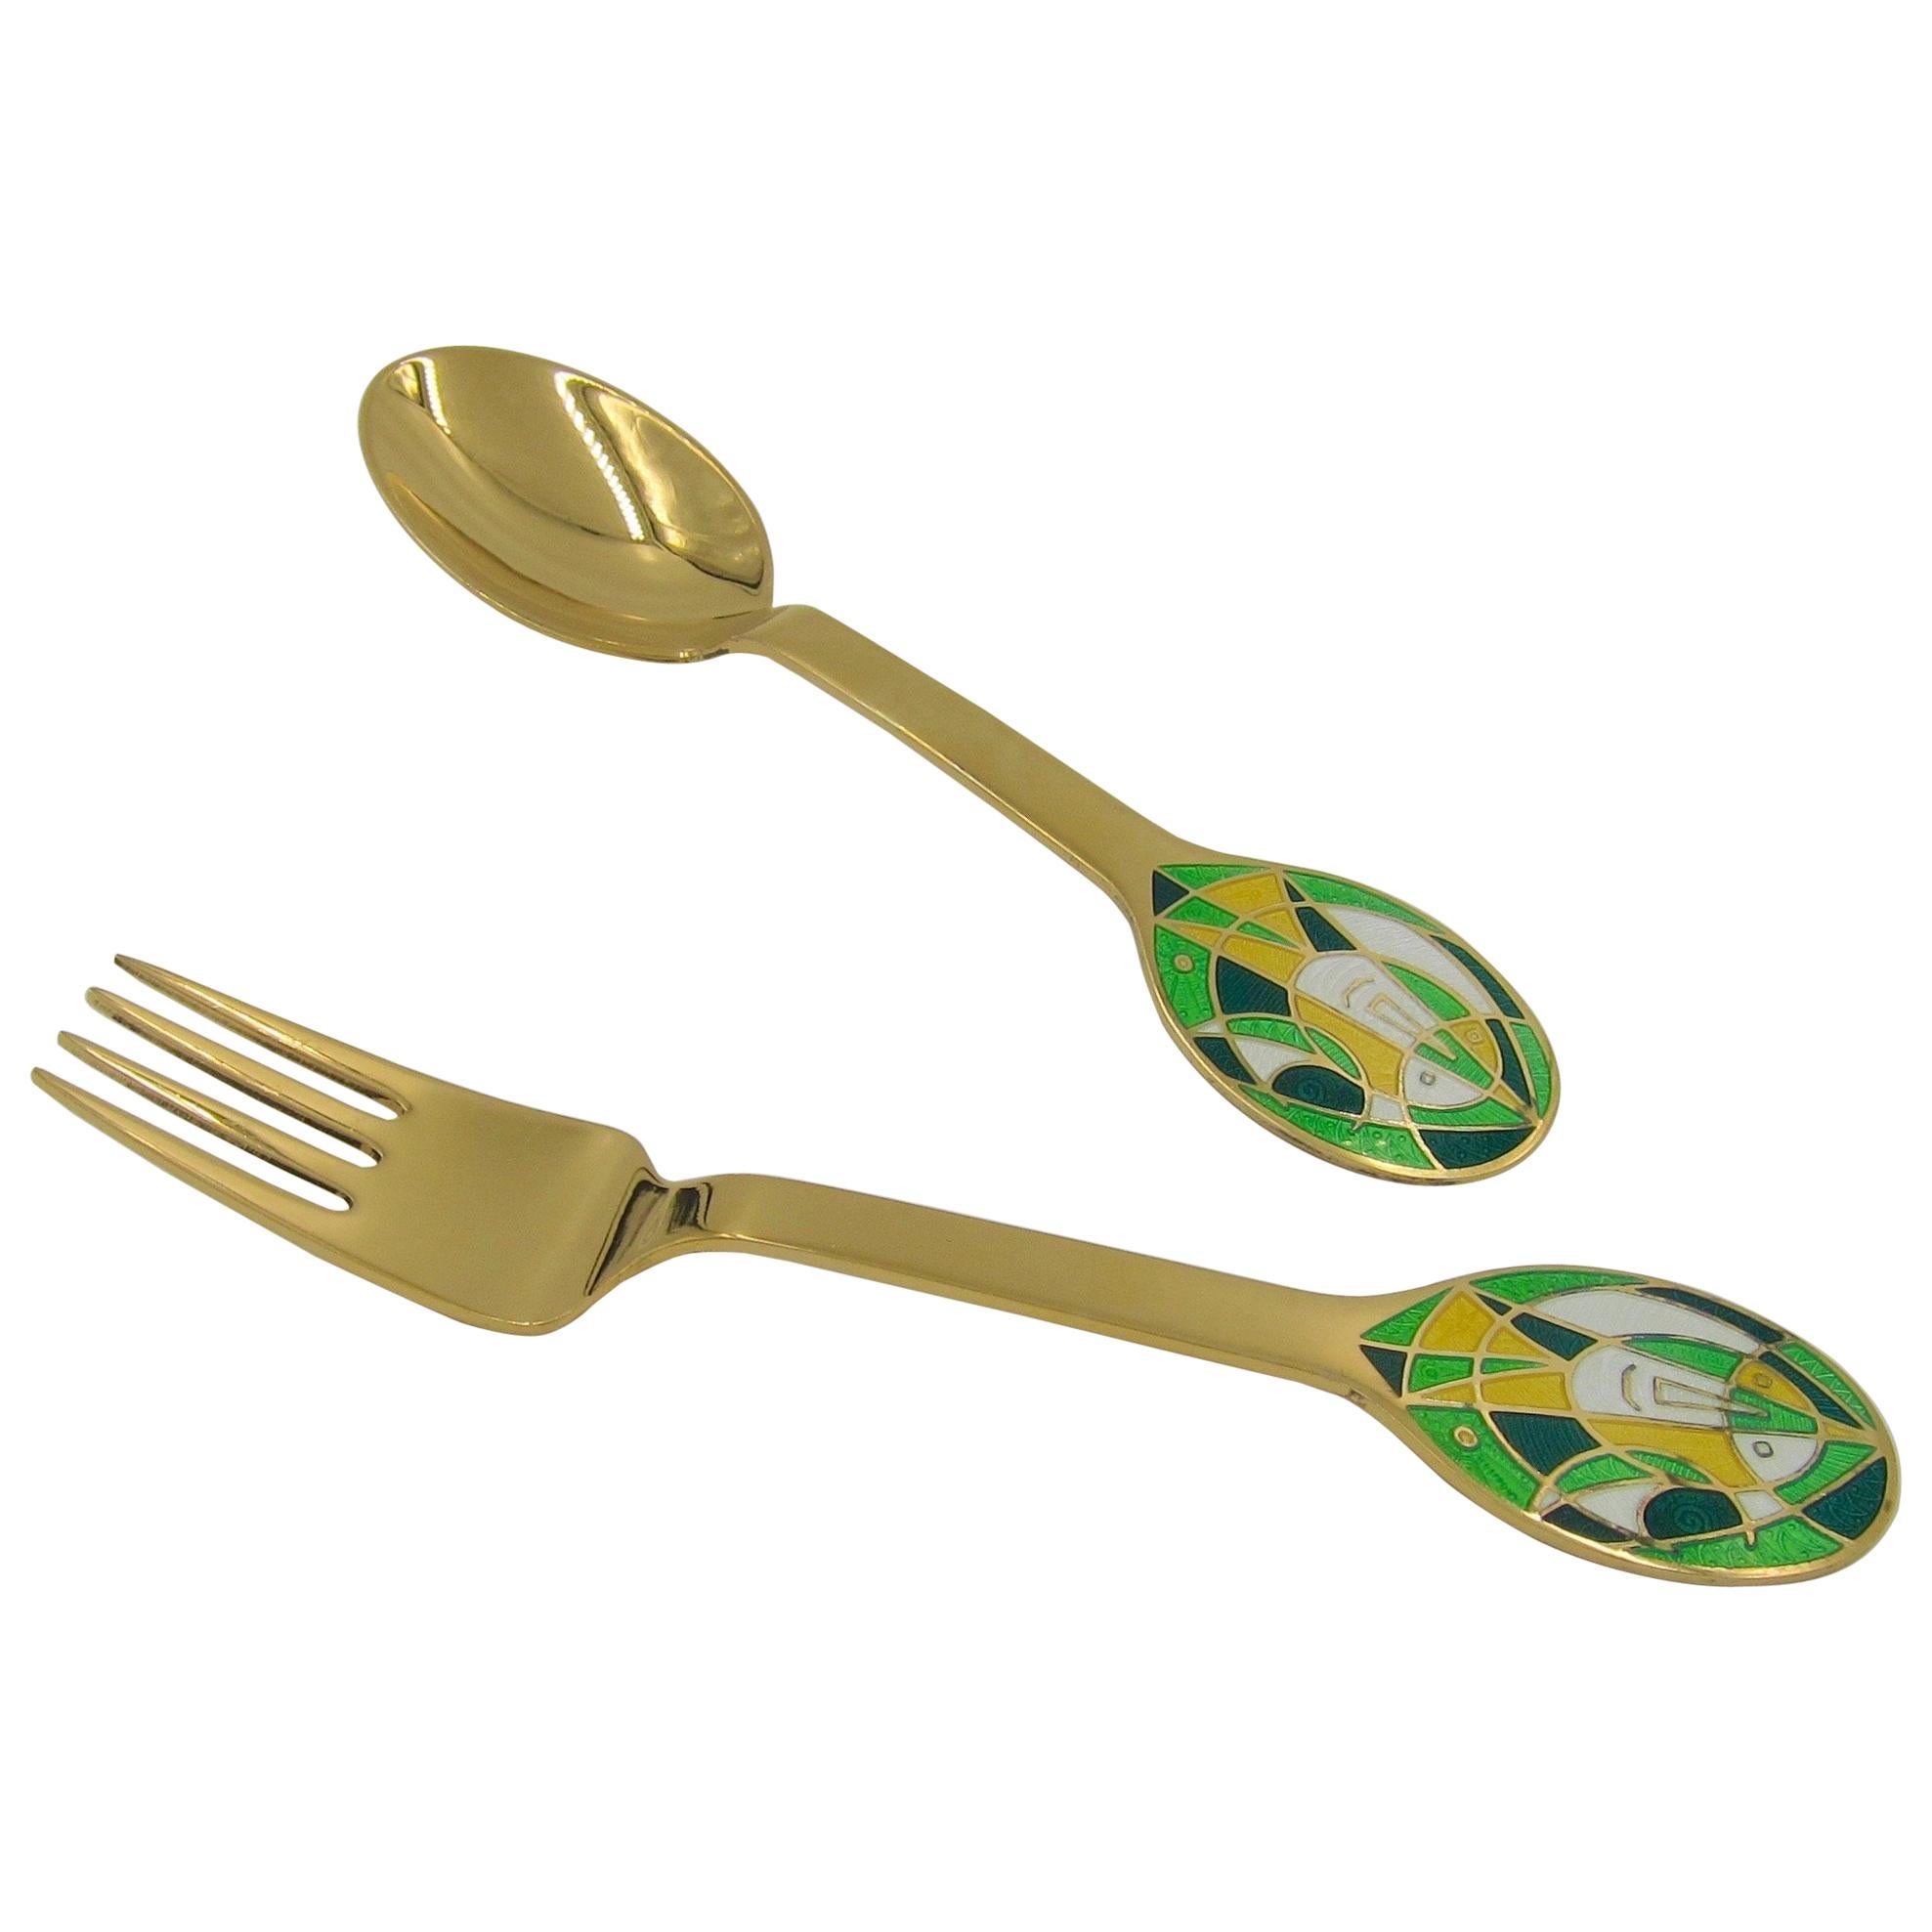 Anton Michelsen Gilded Silver and Enamel Christmas Fork and Spoon Set, 1980